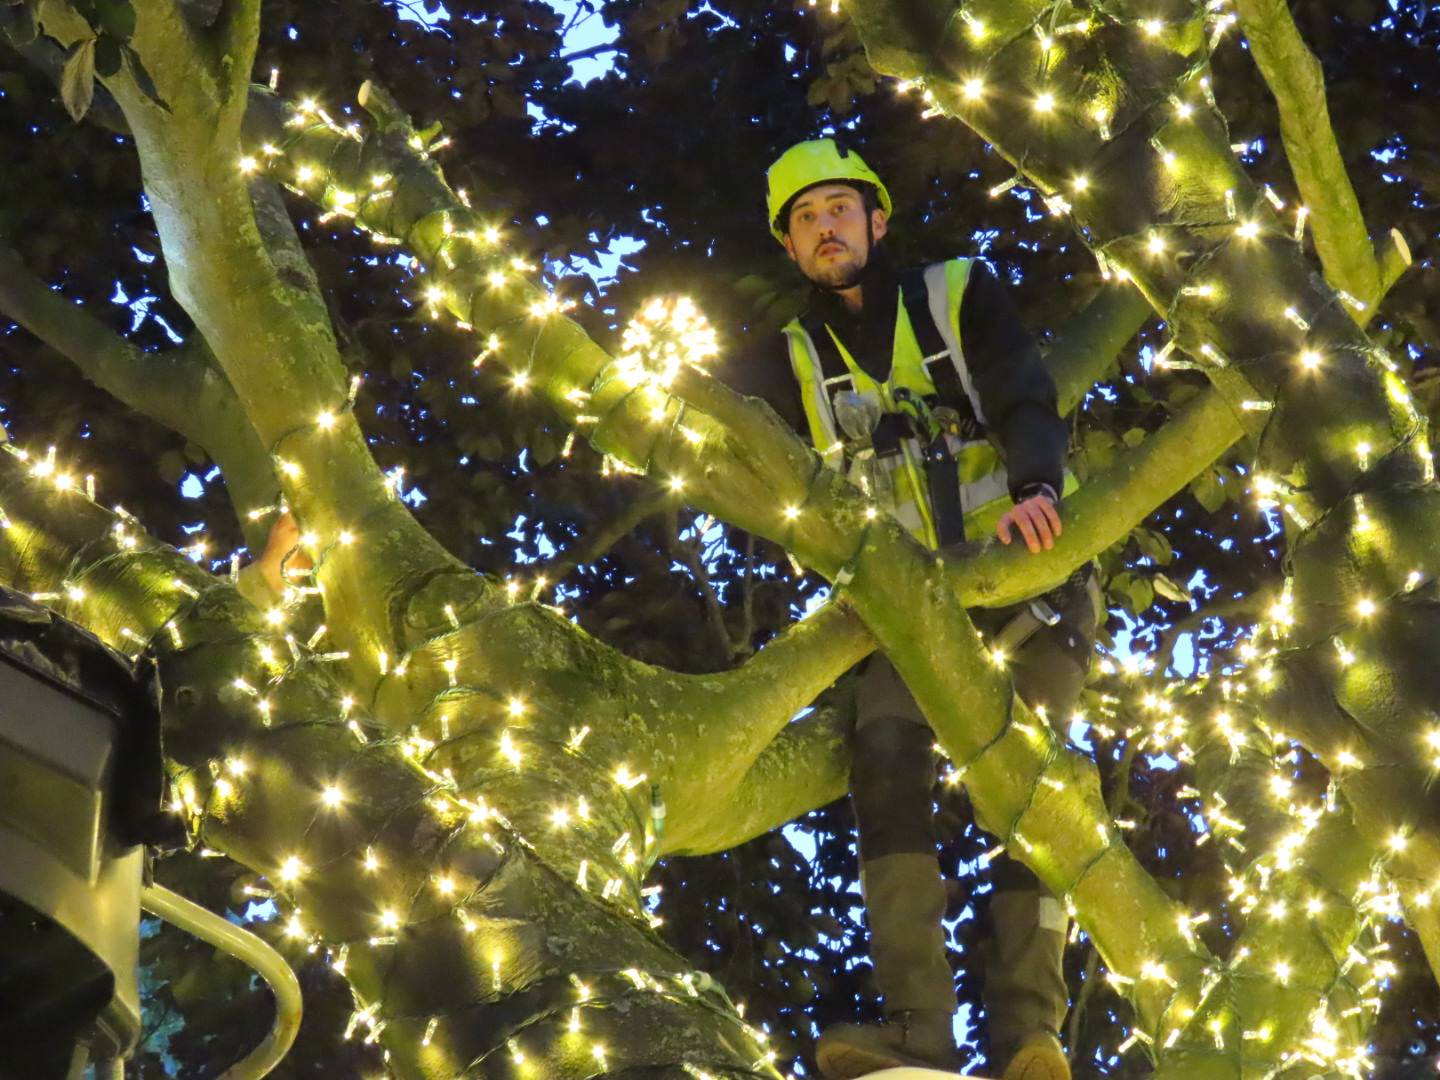 Ainsdale Village in Southport has been lit up with 70,000 new lights thanks to Ainsdale Civic Society and IllumiDex UK Ltd. Photo by Andrew Brown Media